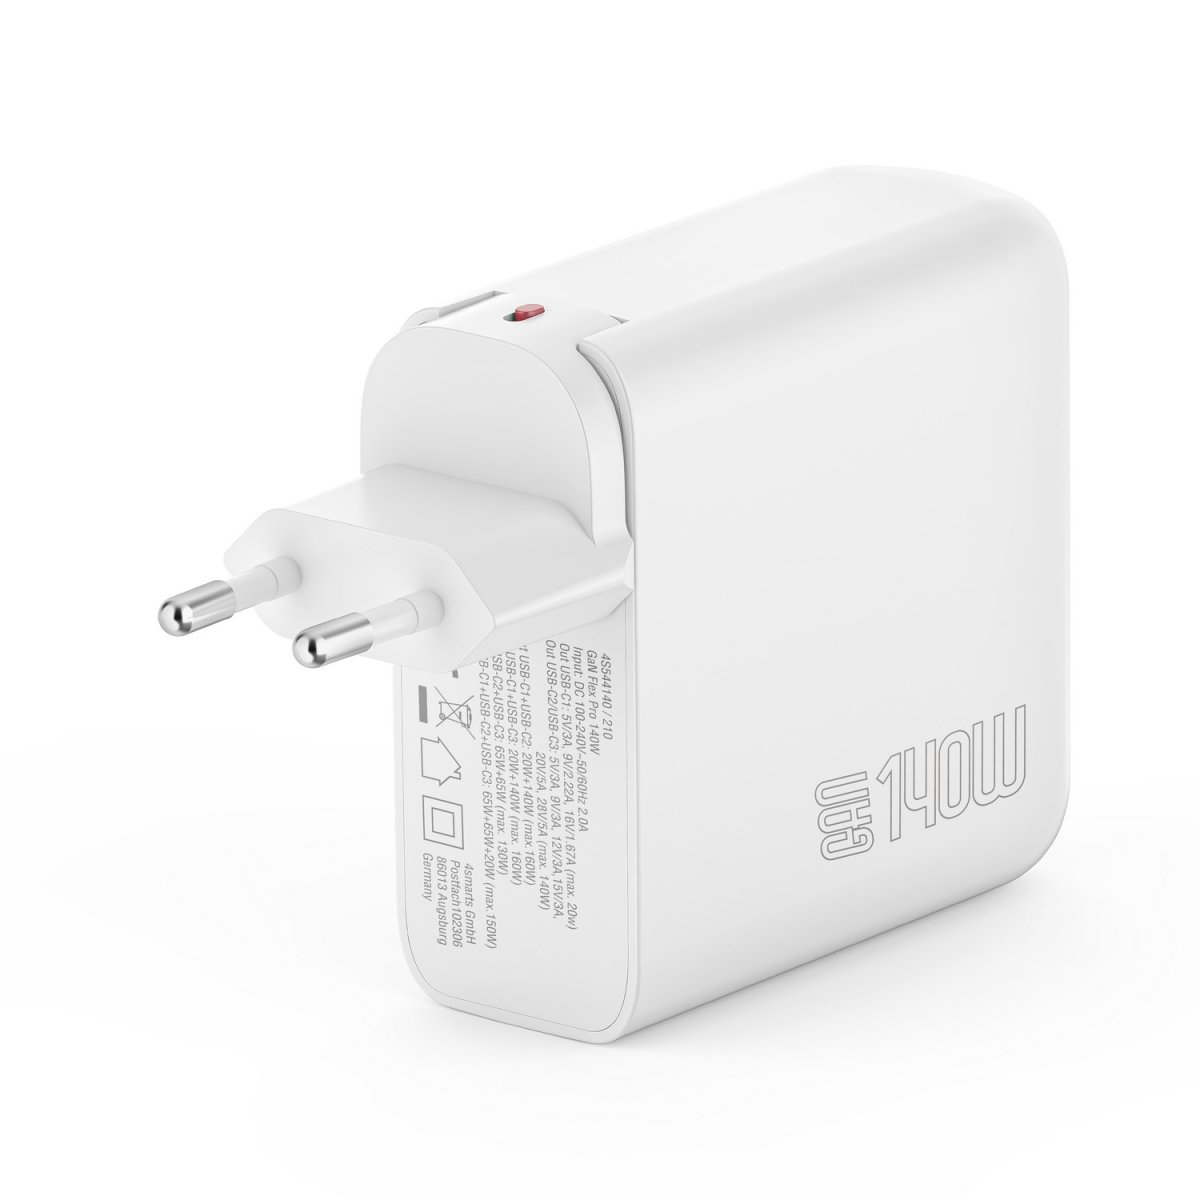 4smarts 4S544140  4smarts Netzteil - 140 Watt - 5 A - Fast Charge, PD 2.0,  PD 3.0, QC 3.0, QC 4+, Super Charge, Power Delivery 3.1, Apple 2.4A, PD/PPS